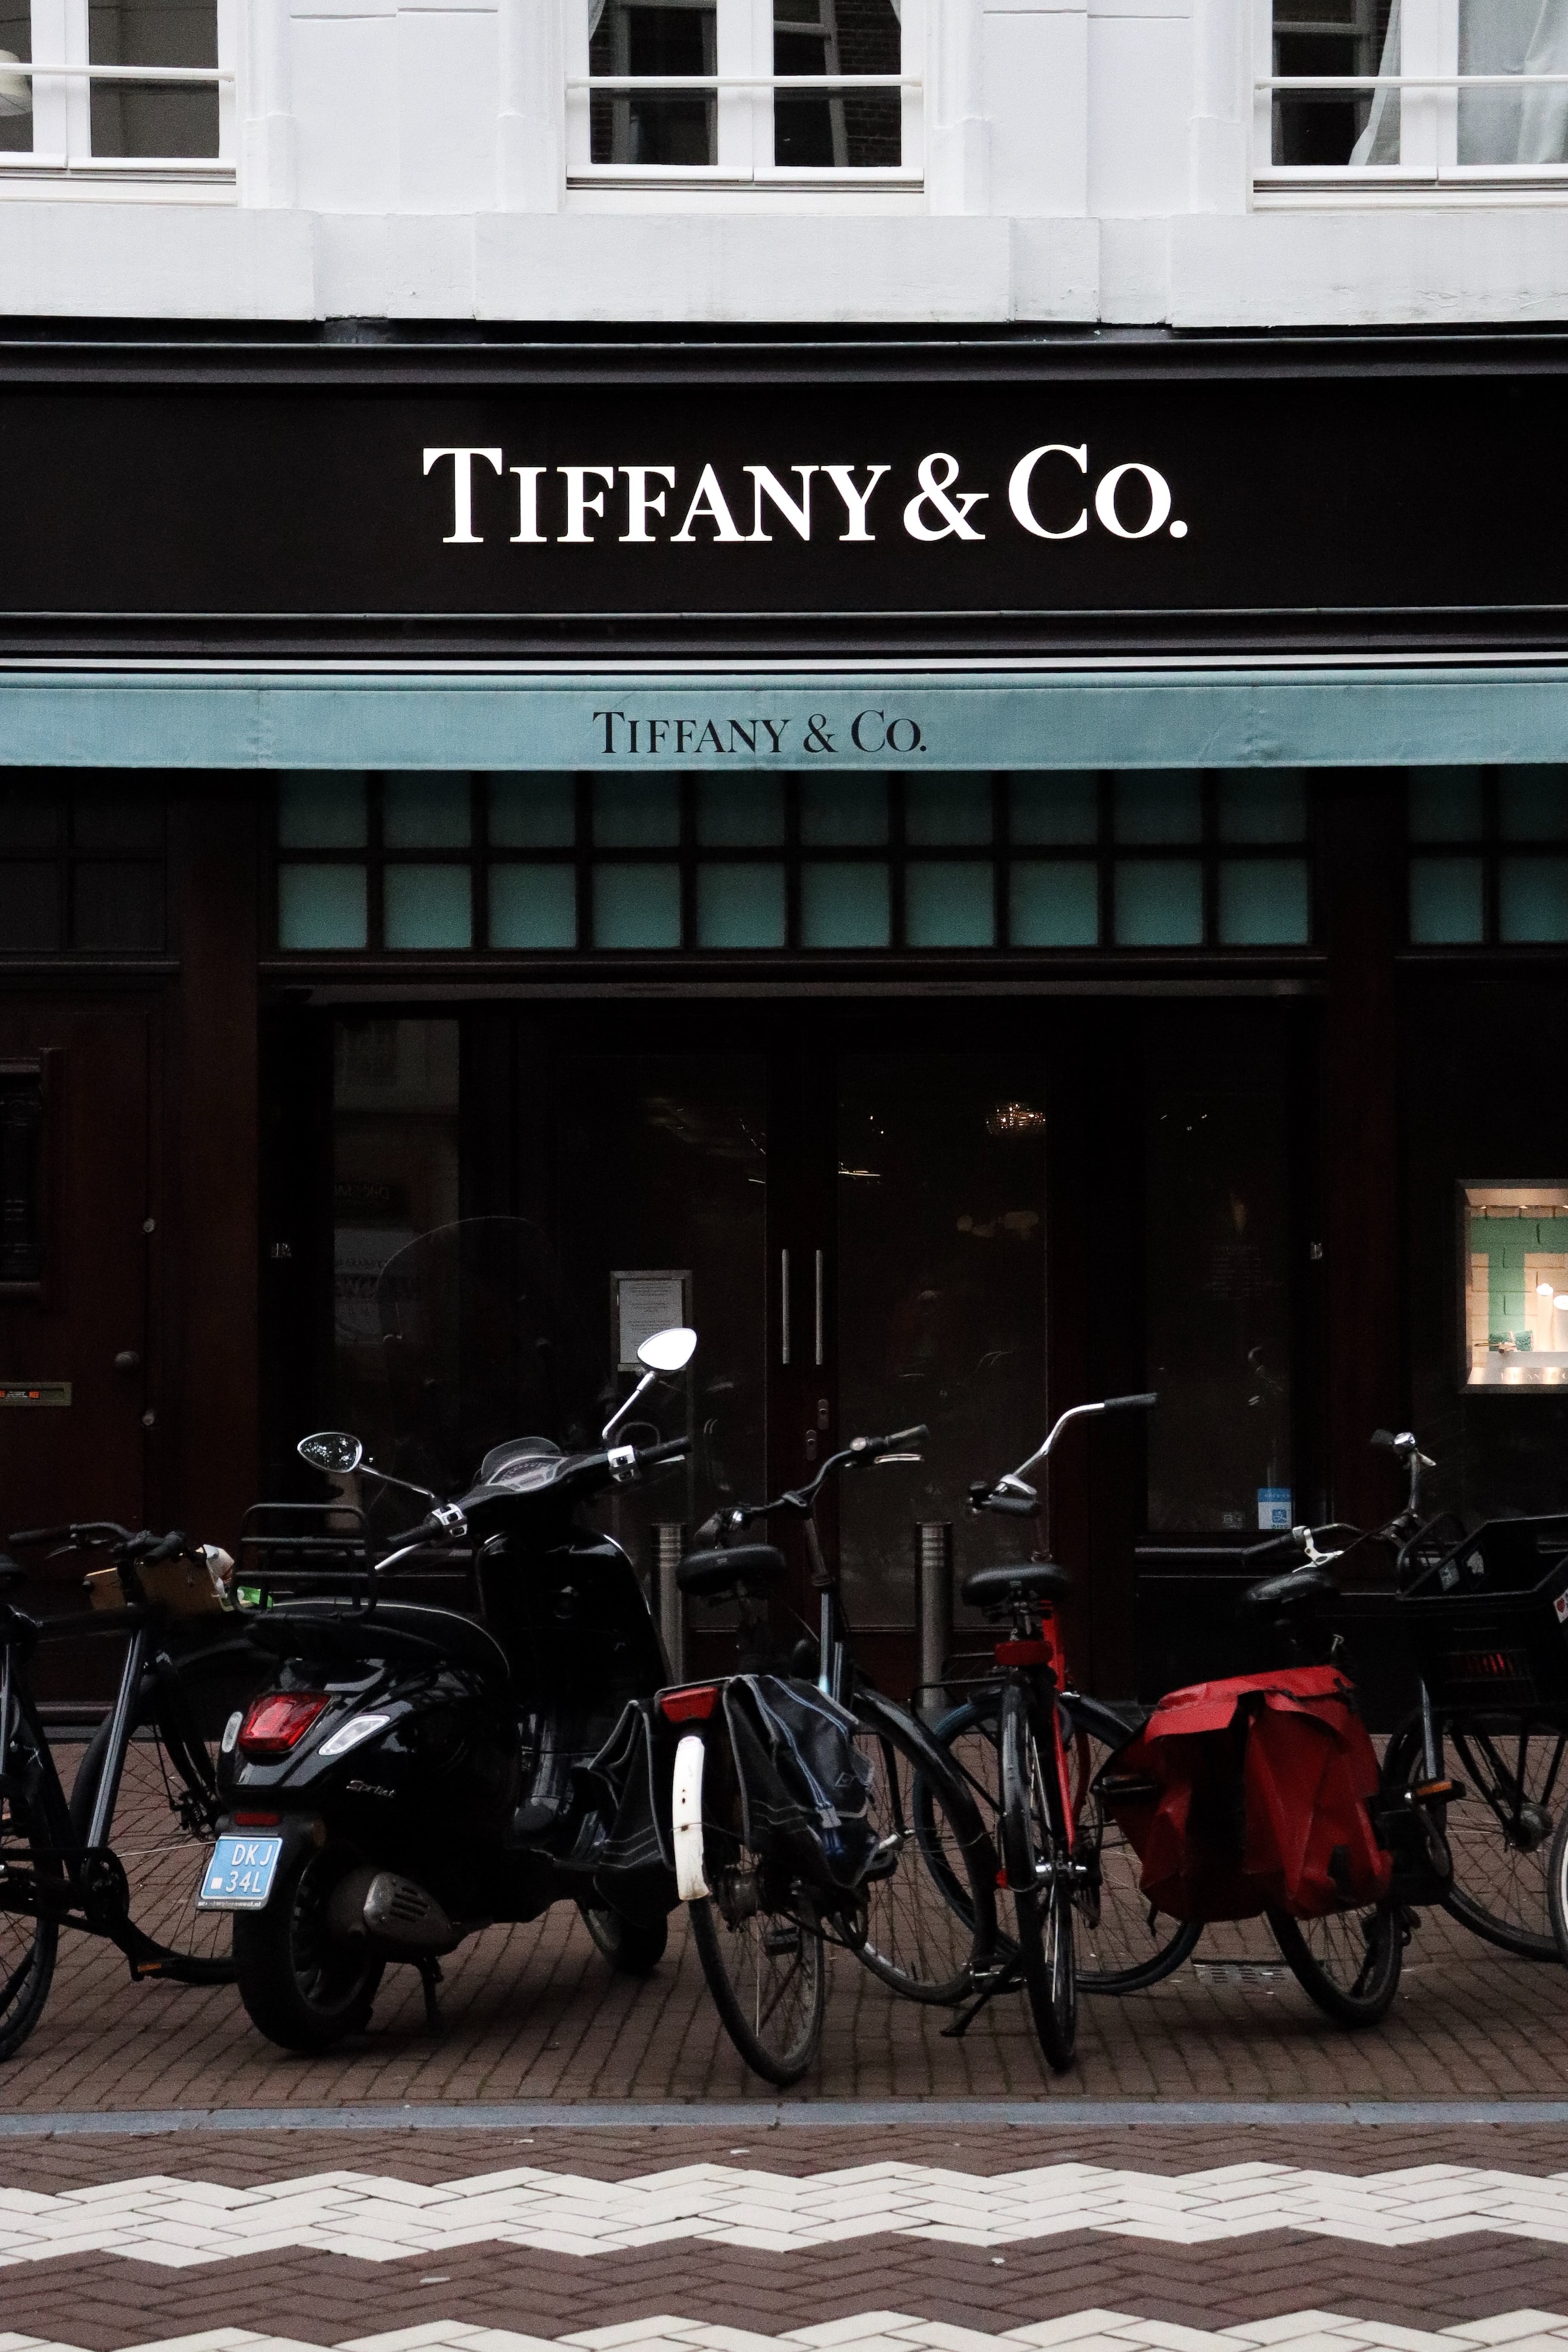 Photo of Tiffany & Co. with scooters outside | Source: Unsplash